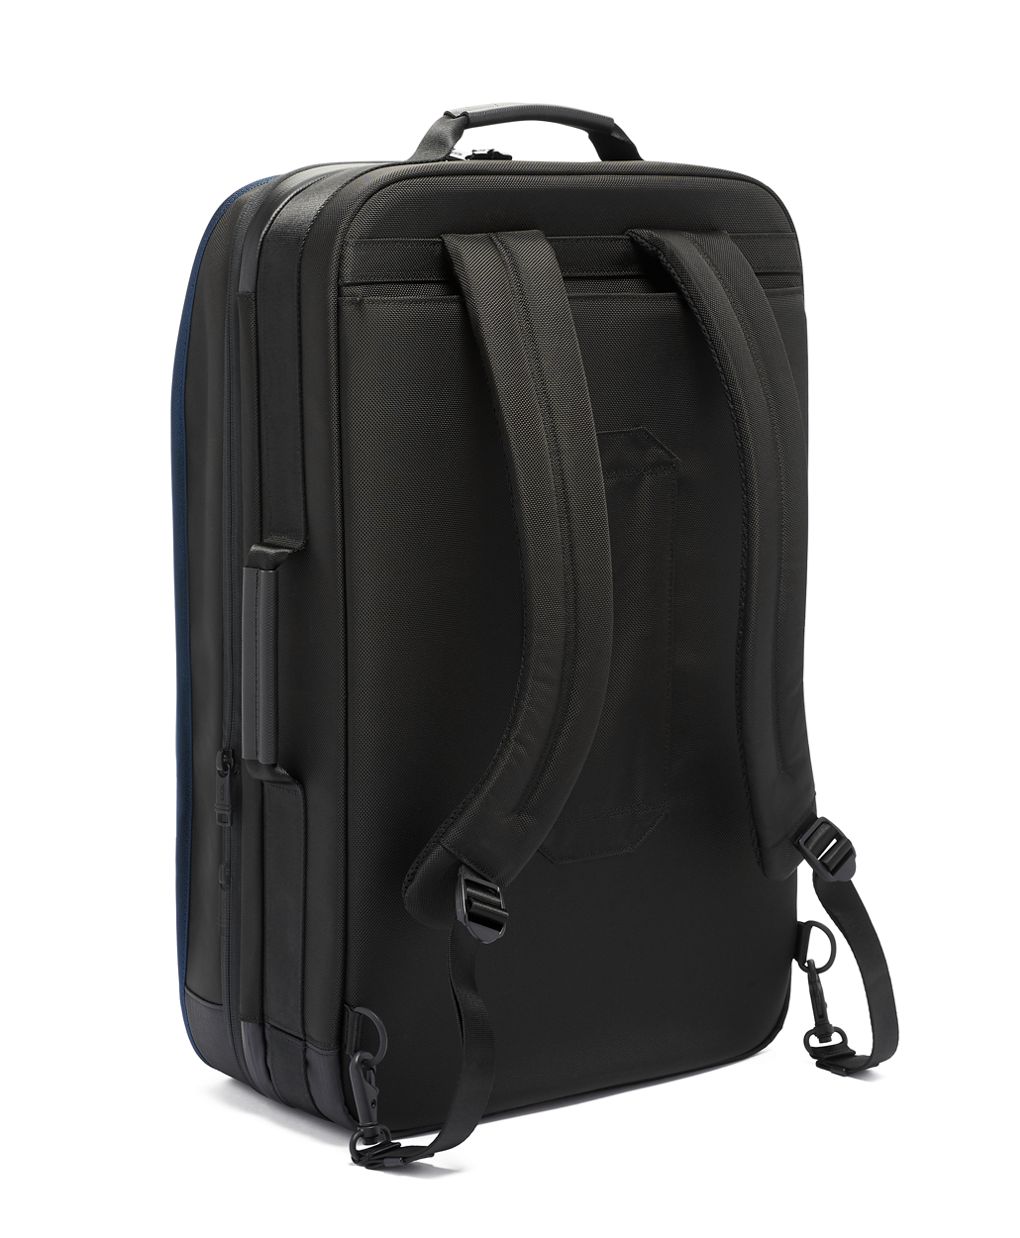 Excursion Backpack Duffel | Tumi US